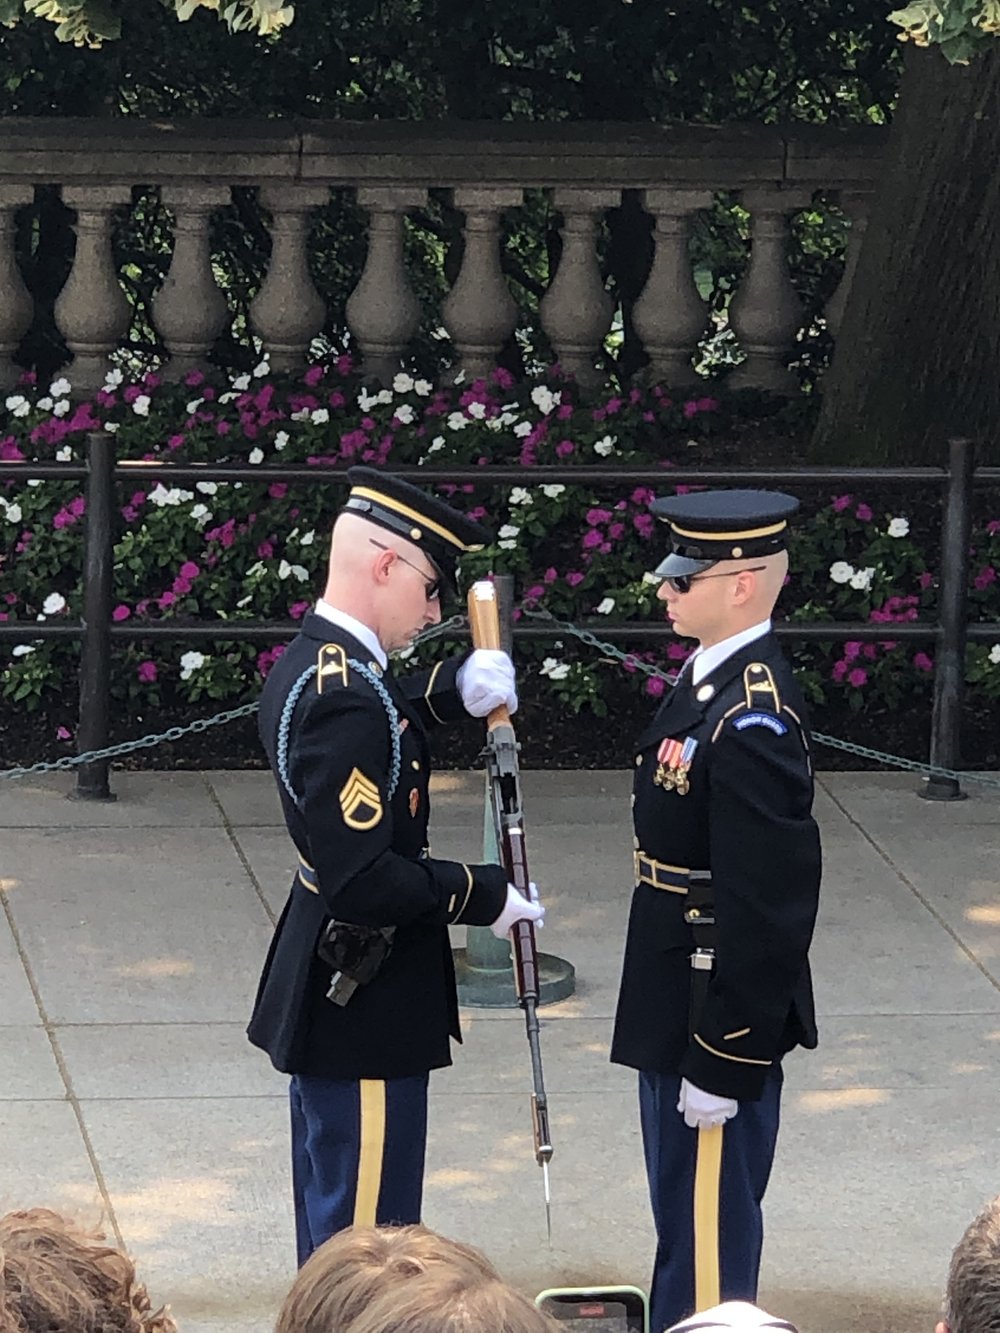 We watched the changing of the guard at the Tomb of the Unknown Soldier. (see video below)